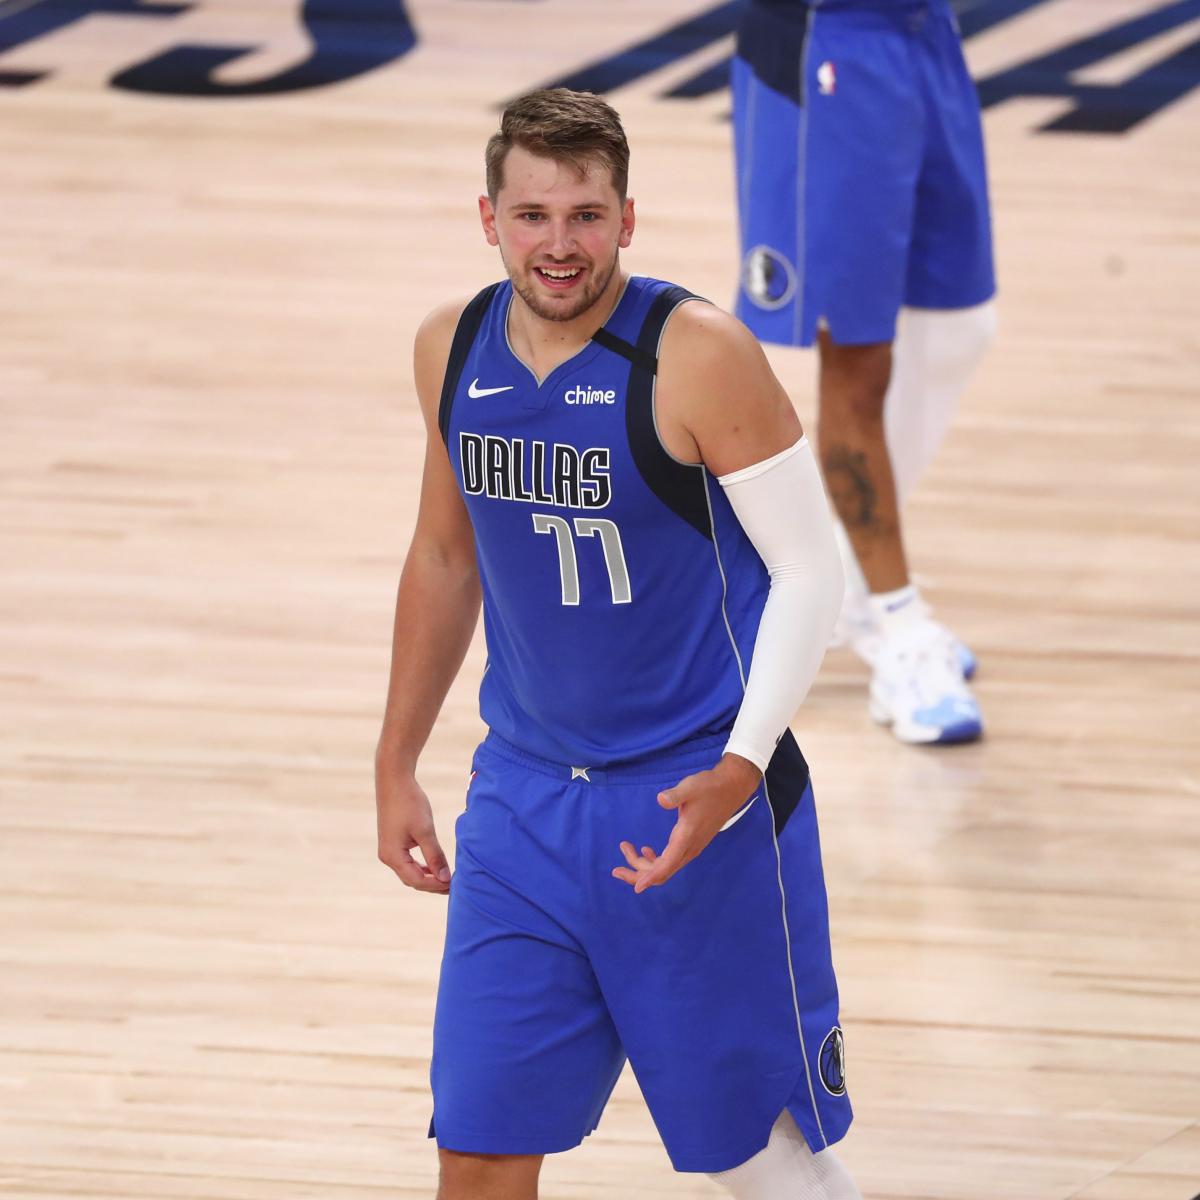 How Tall Is Luka Doncic